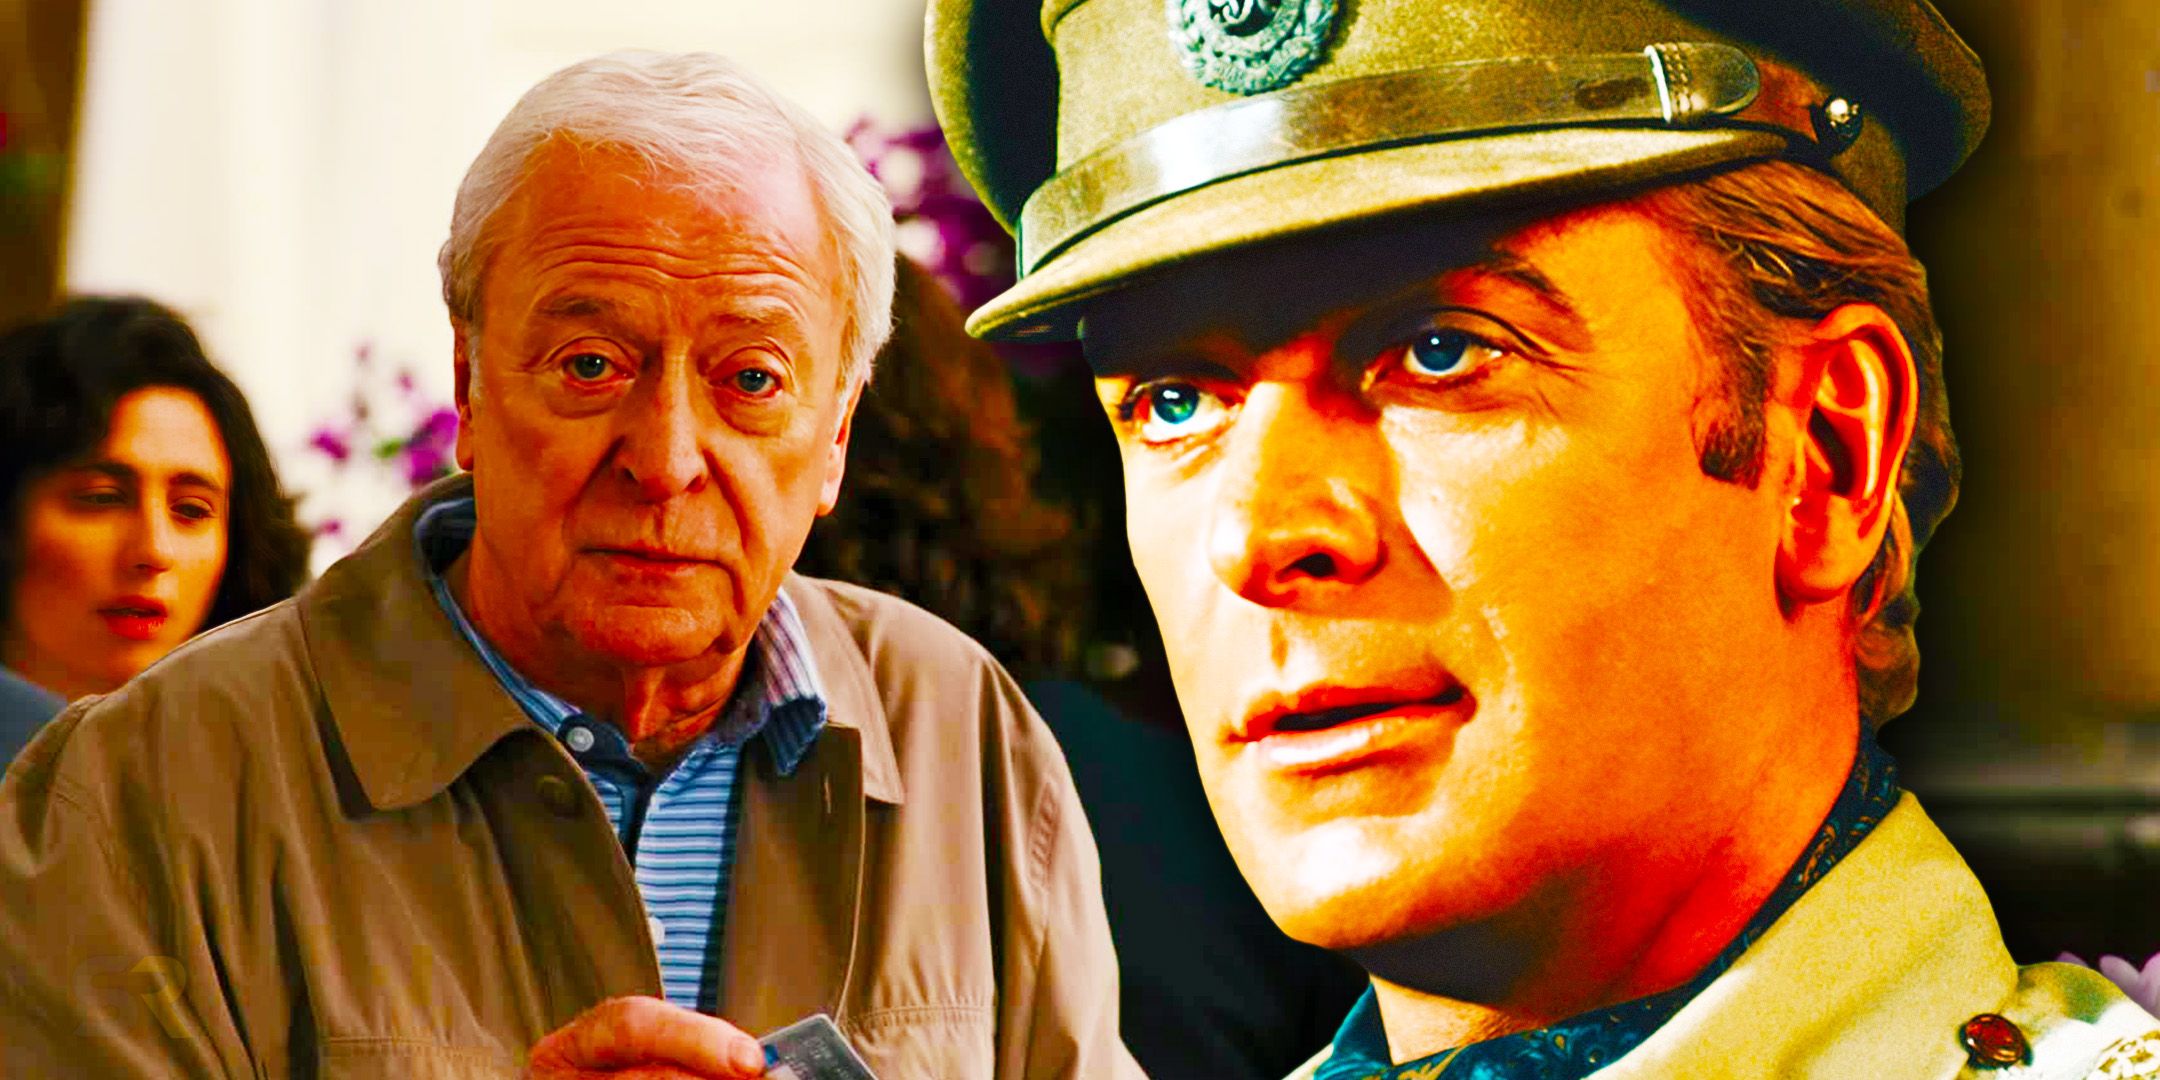 Michael Caine Hated Filming 1 War Movie So Much It Inspired A Rule He Only Broke Once More